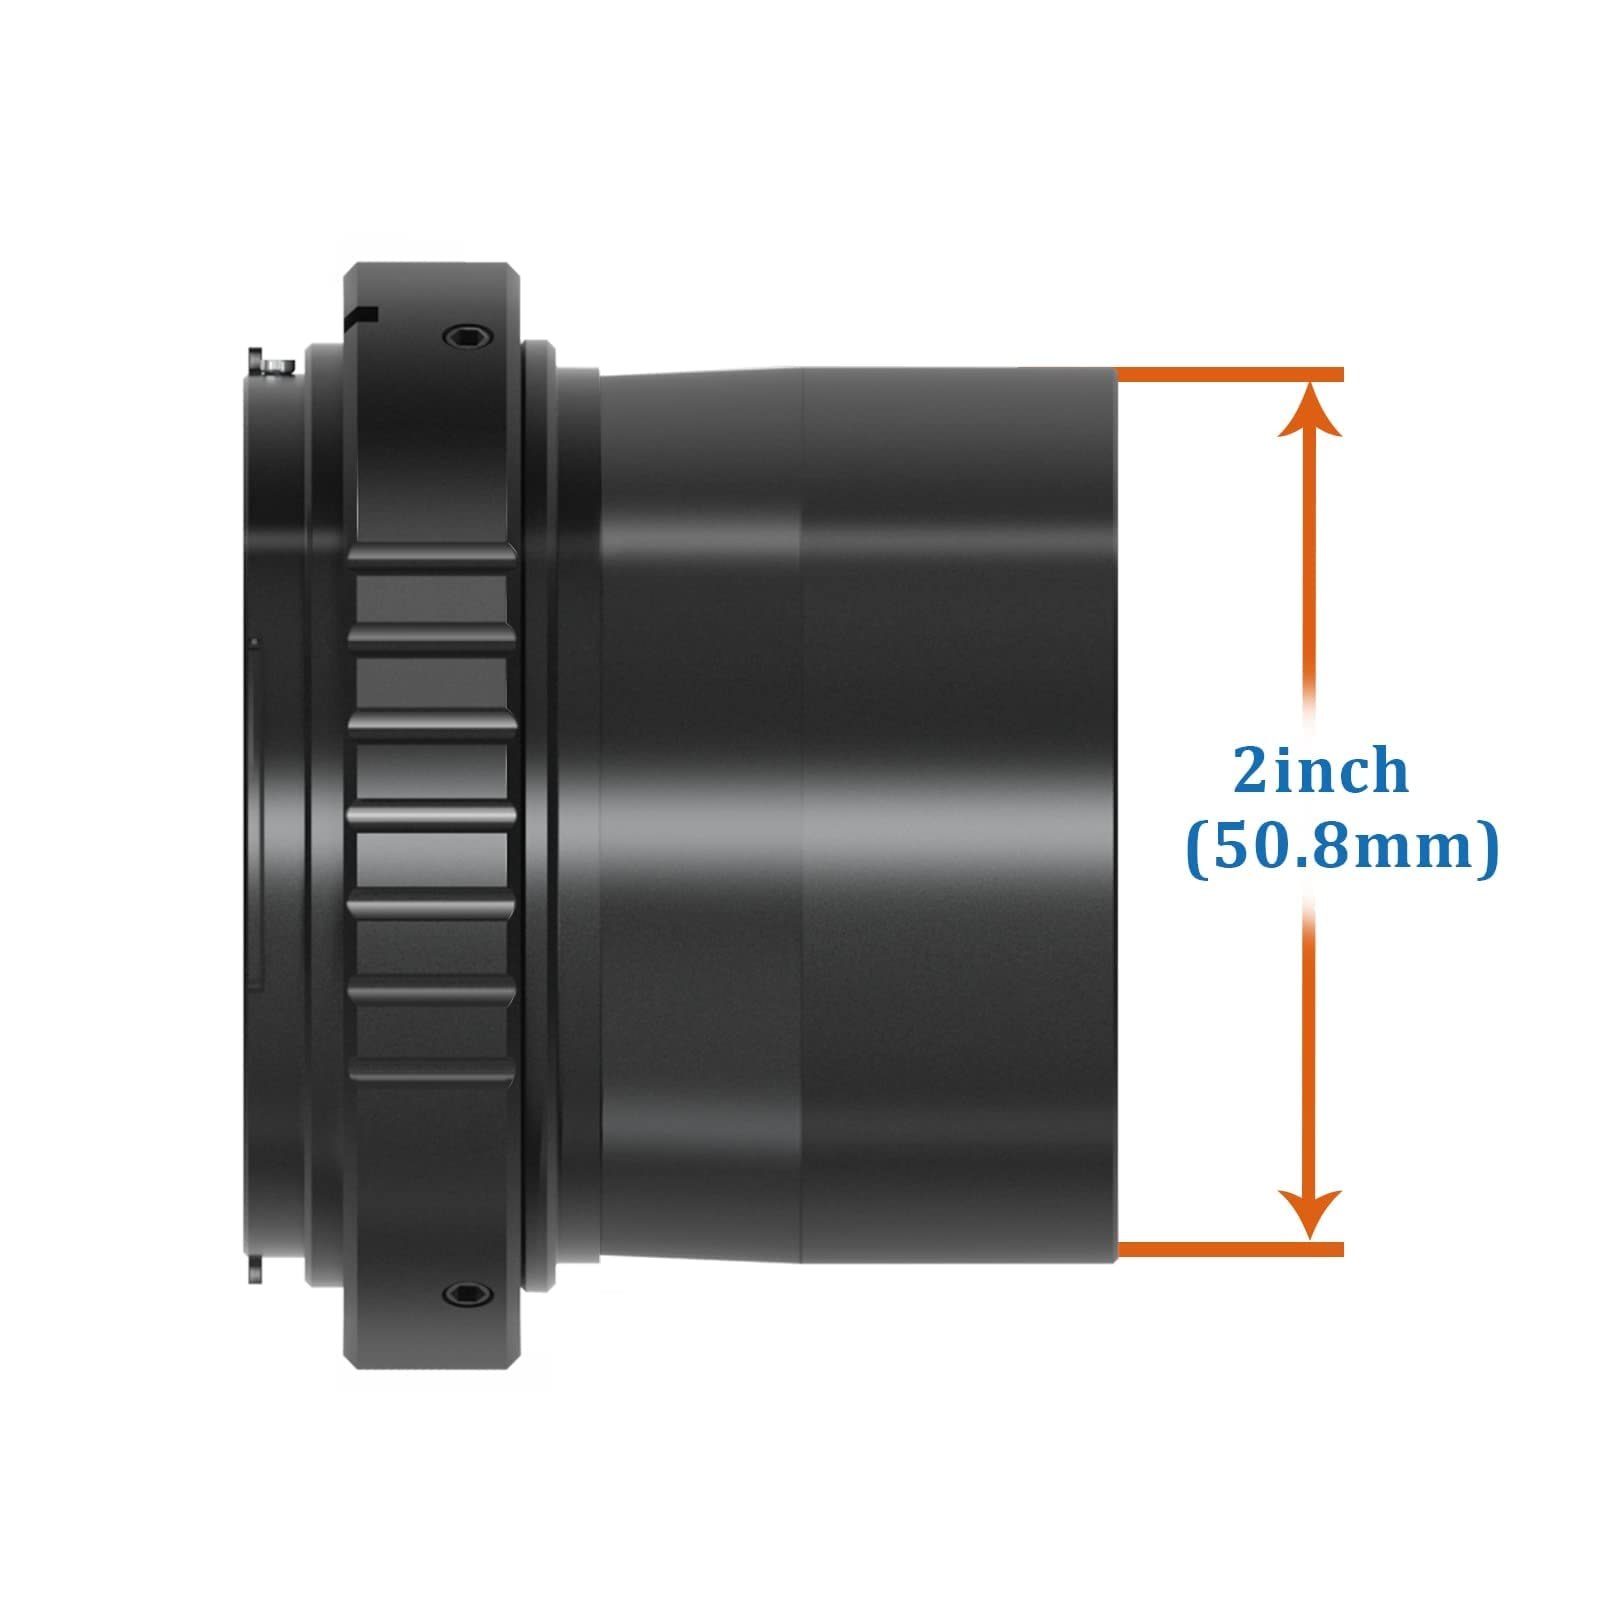 Weooen 2inch Telescope Camera Adapter with Internal Filter Threads, Metal Telescope T Adapter and T Mount, Compatible for Canon EOS, SLR, DSLR